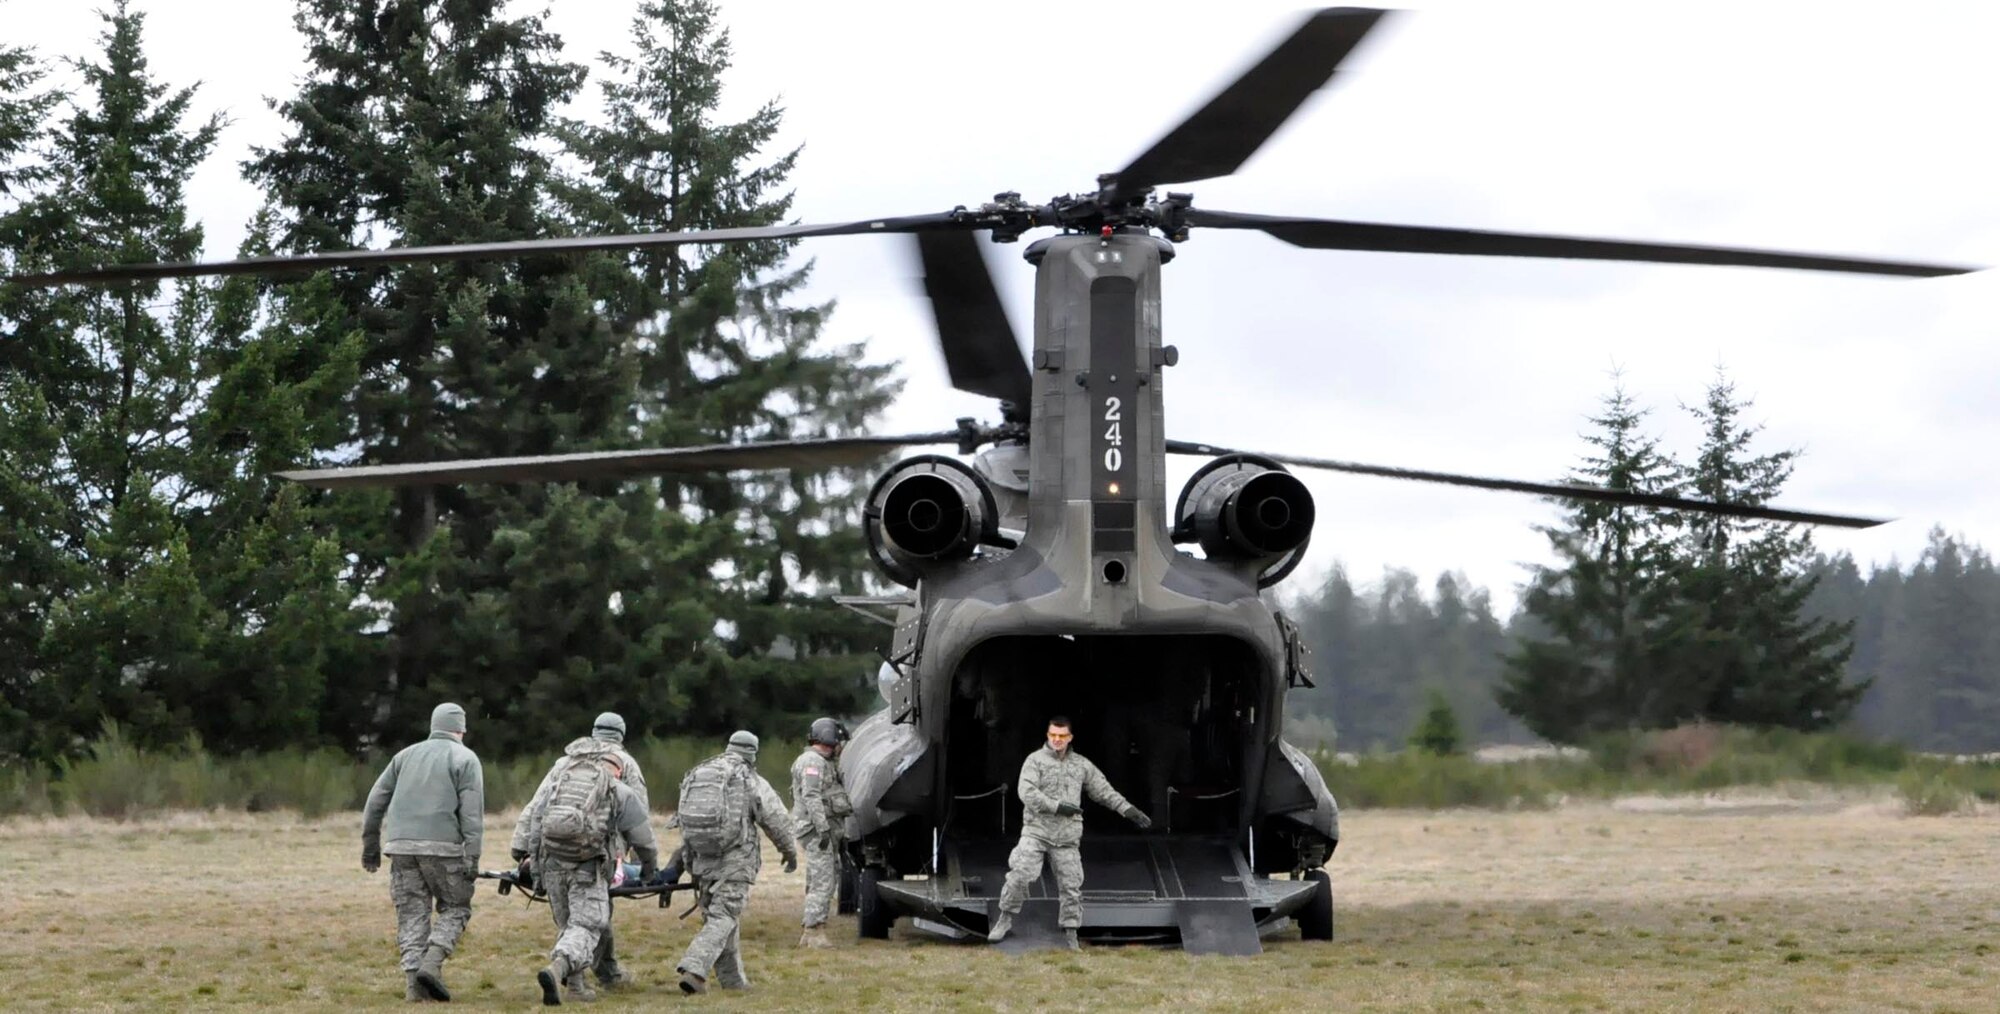 446th AES airmen load a patient into a CH-47 Chinook helicopter during an EMT refresher course on Fort Lewis, Wash. on Sunday, April 1st. Their unit is the only one in the Air Force with such a hands-on training curriculum to update their EMT skills.